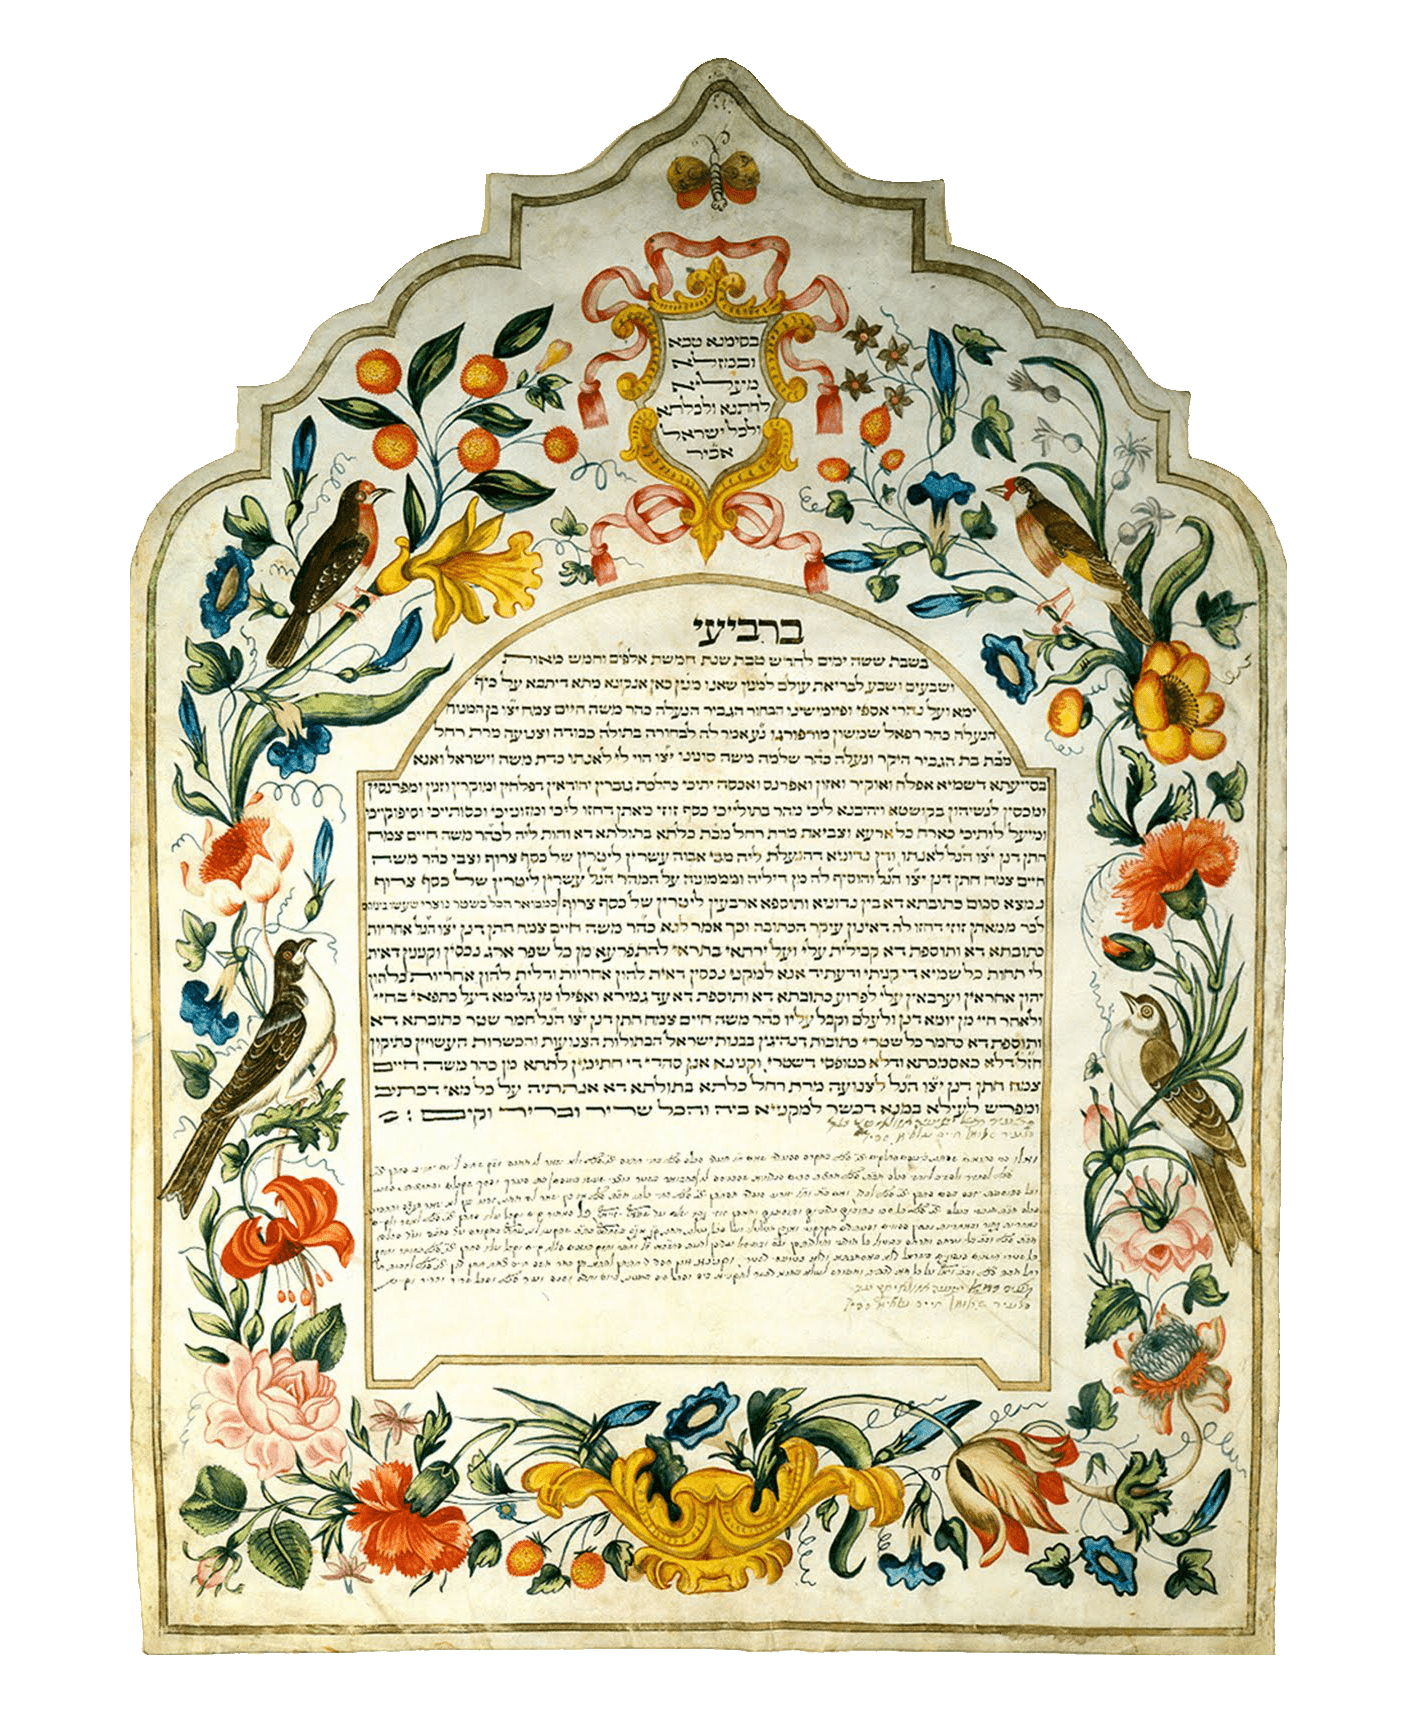 Why Give Your Wife a Ketubah?